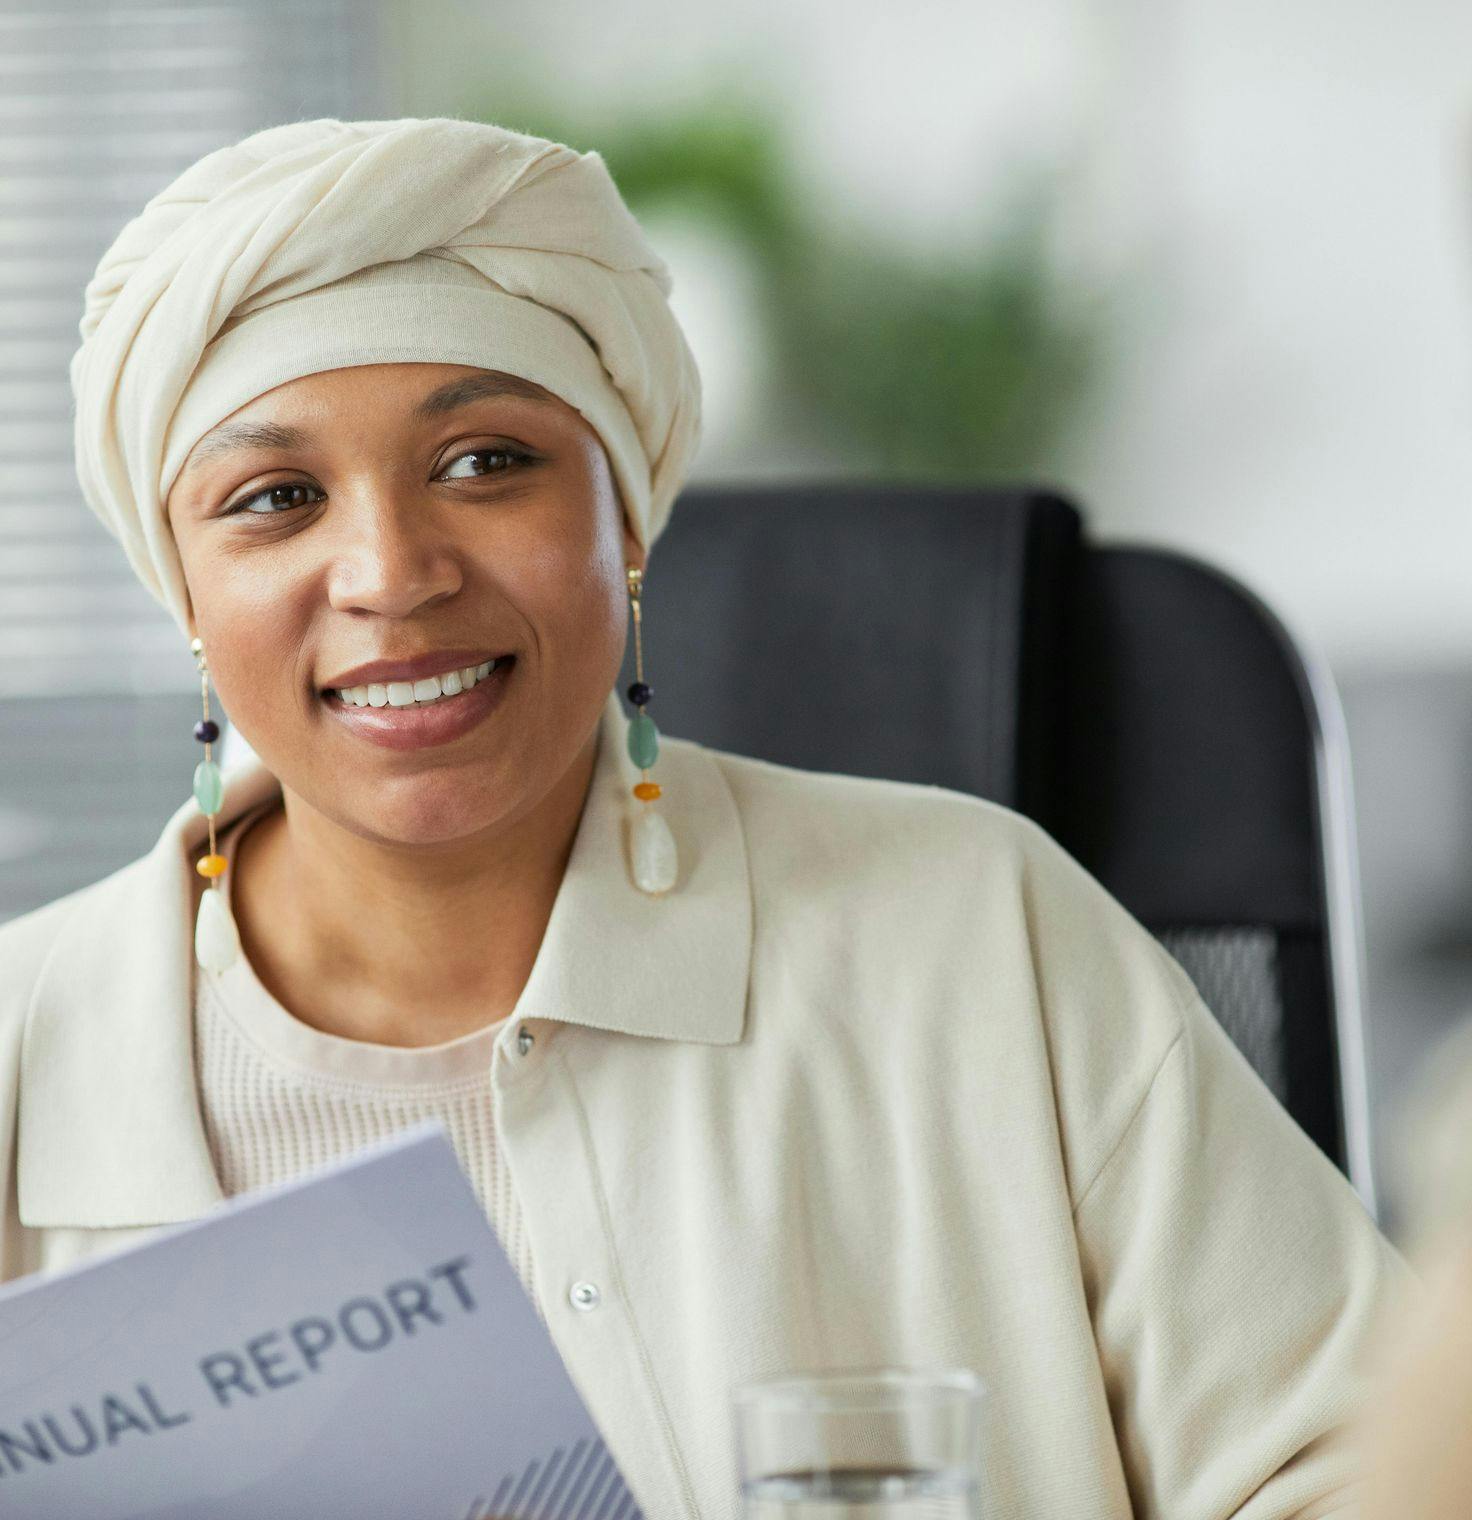 SMiling woman in a turban sitting in an office reviewing a report